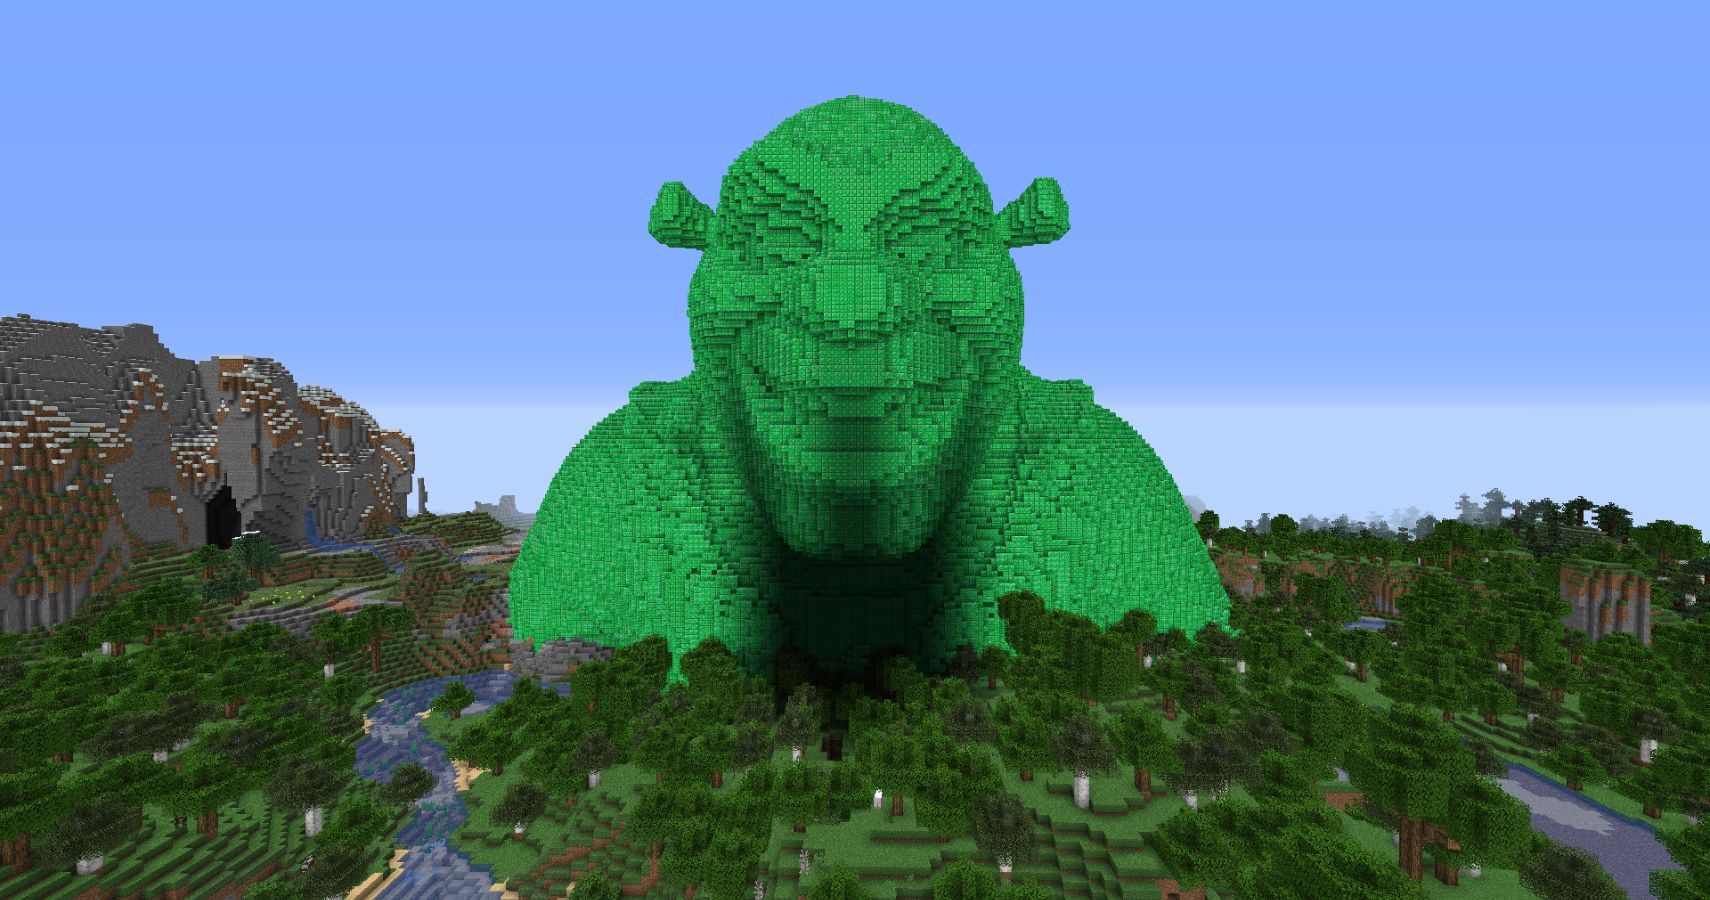 Shrek S Head Has Been Built Out Of Emerald Blocks In Minecraft